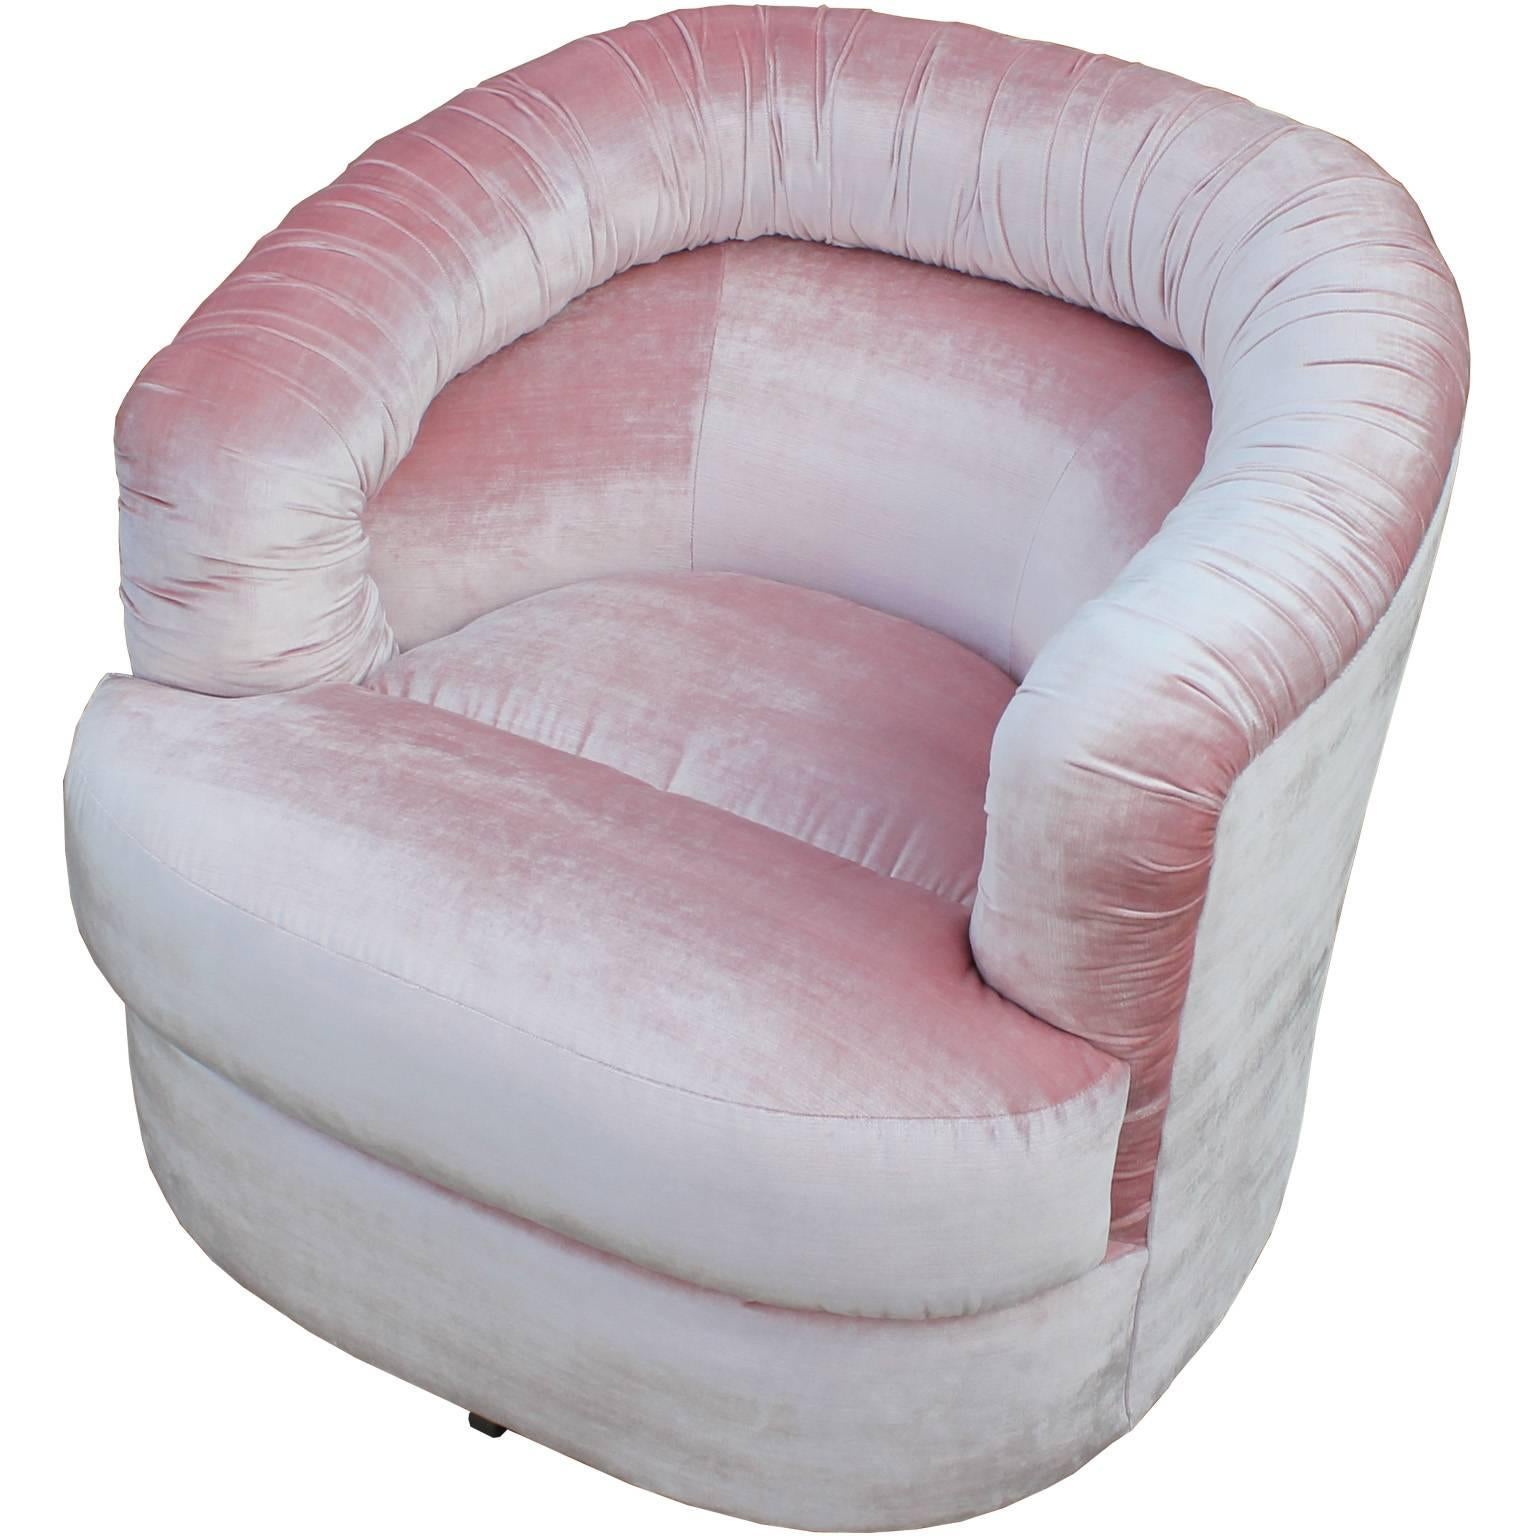 Stunning pair of ultra luxe and comfortable swivel chairs. Chairs are freshly upholstered in a silky pale pink velvet. A ruched or pleated back adds visual interest to the clean lined piece. Perfect in a modern, Hollywood Regency, or Mid-Century